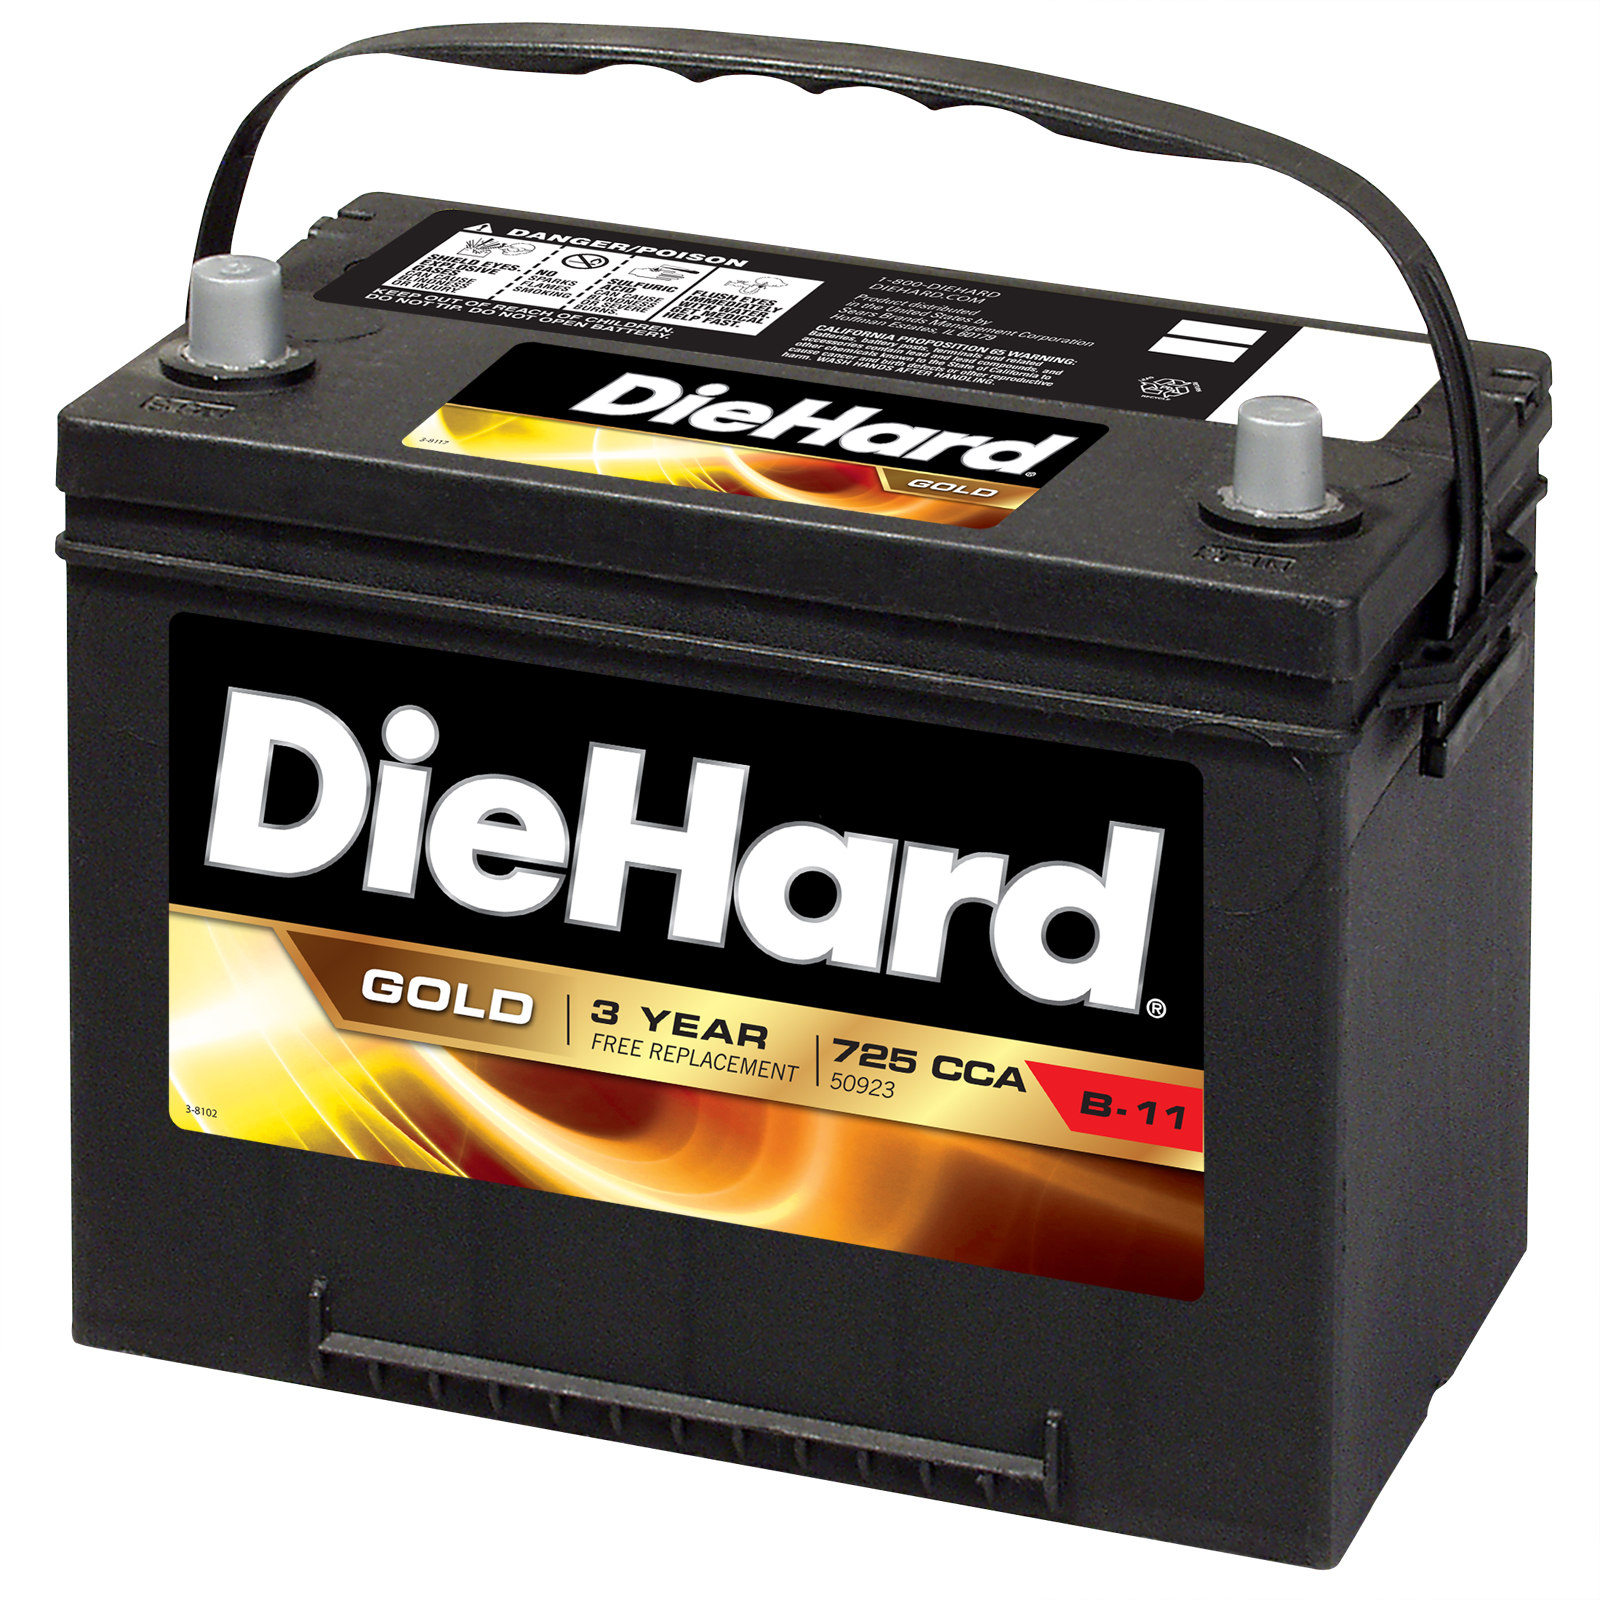 DieHard Gold Automotive Battery - Group Size EP-24F (Price with Exchange)